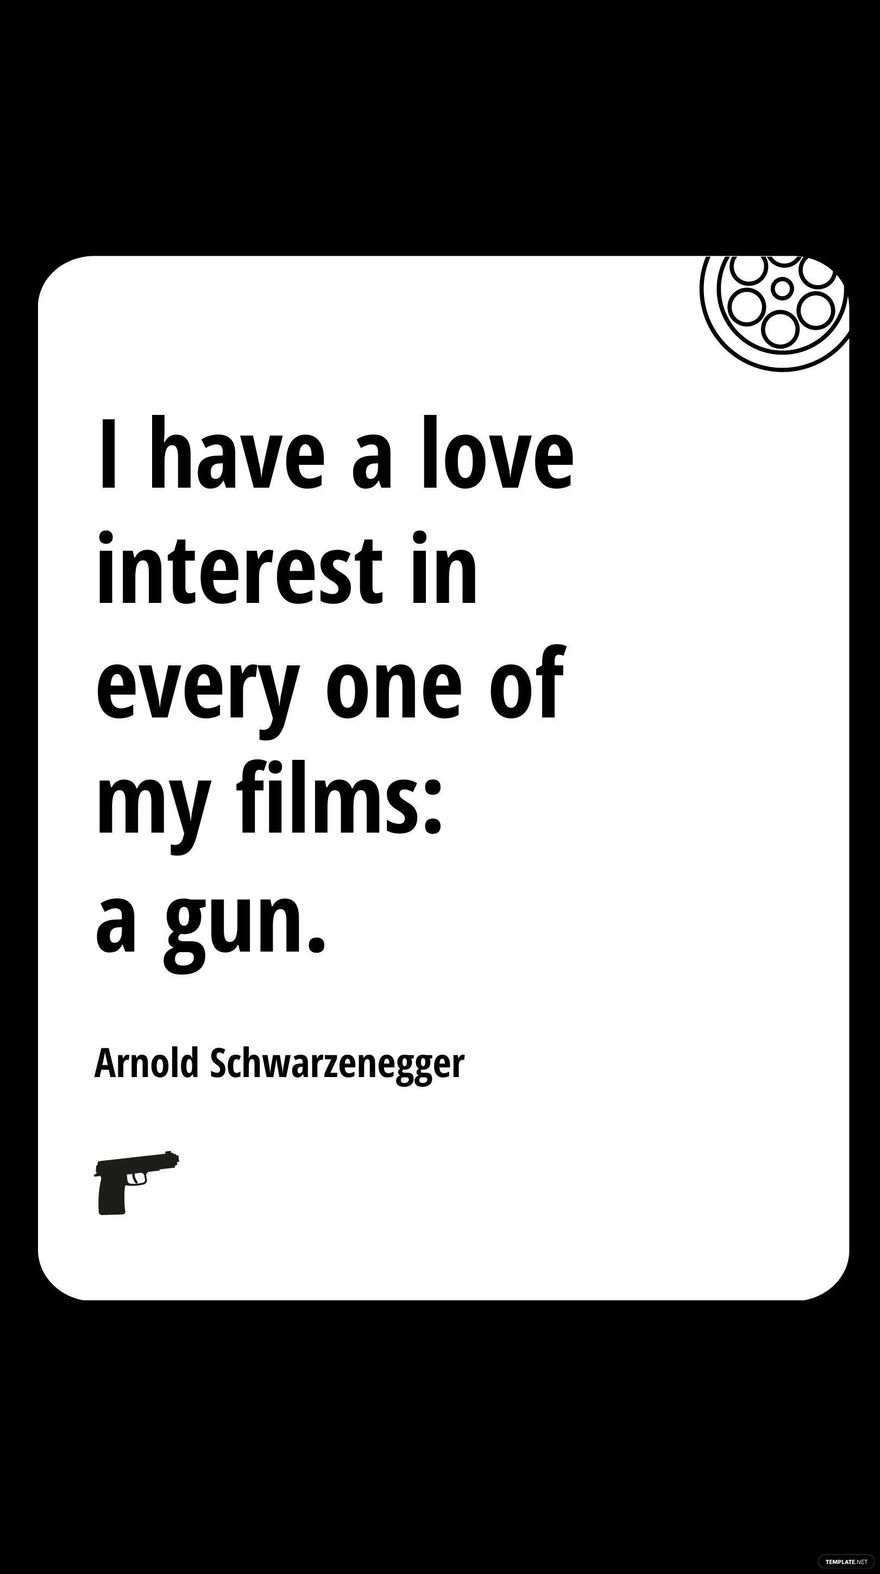 Arnold Schwarzenegger - I have a love interest in every one of my films: a gun.